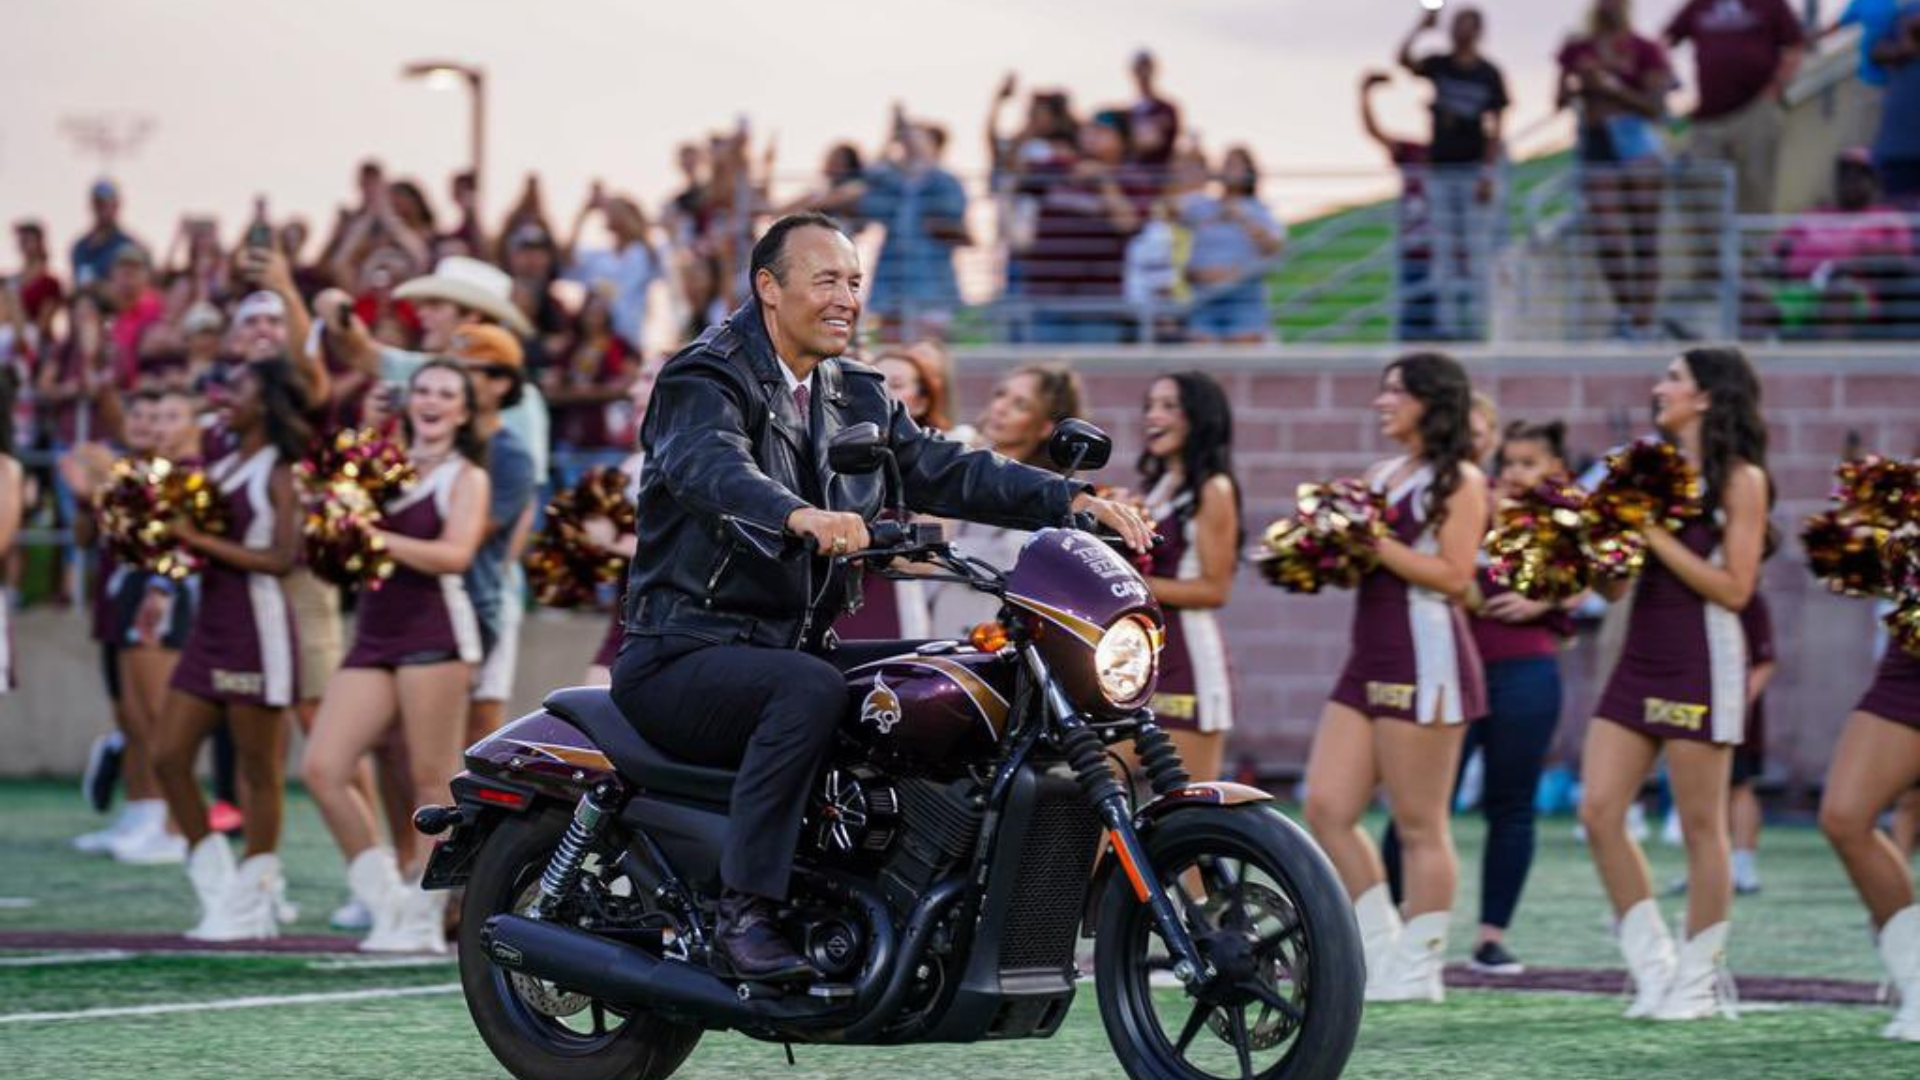 President Damphousse rides a motorcycle into Bobcat Stadium during the opening home football game. 